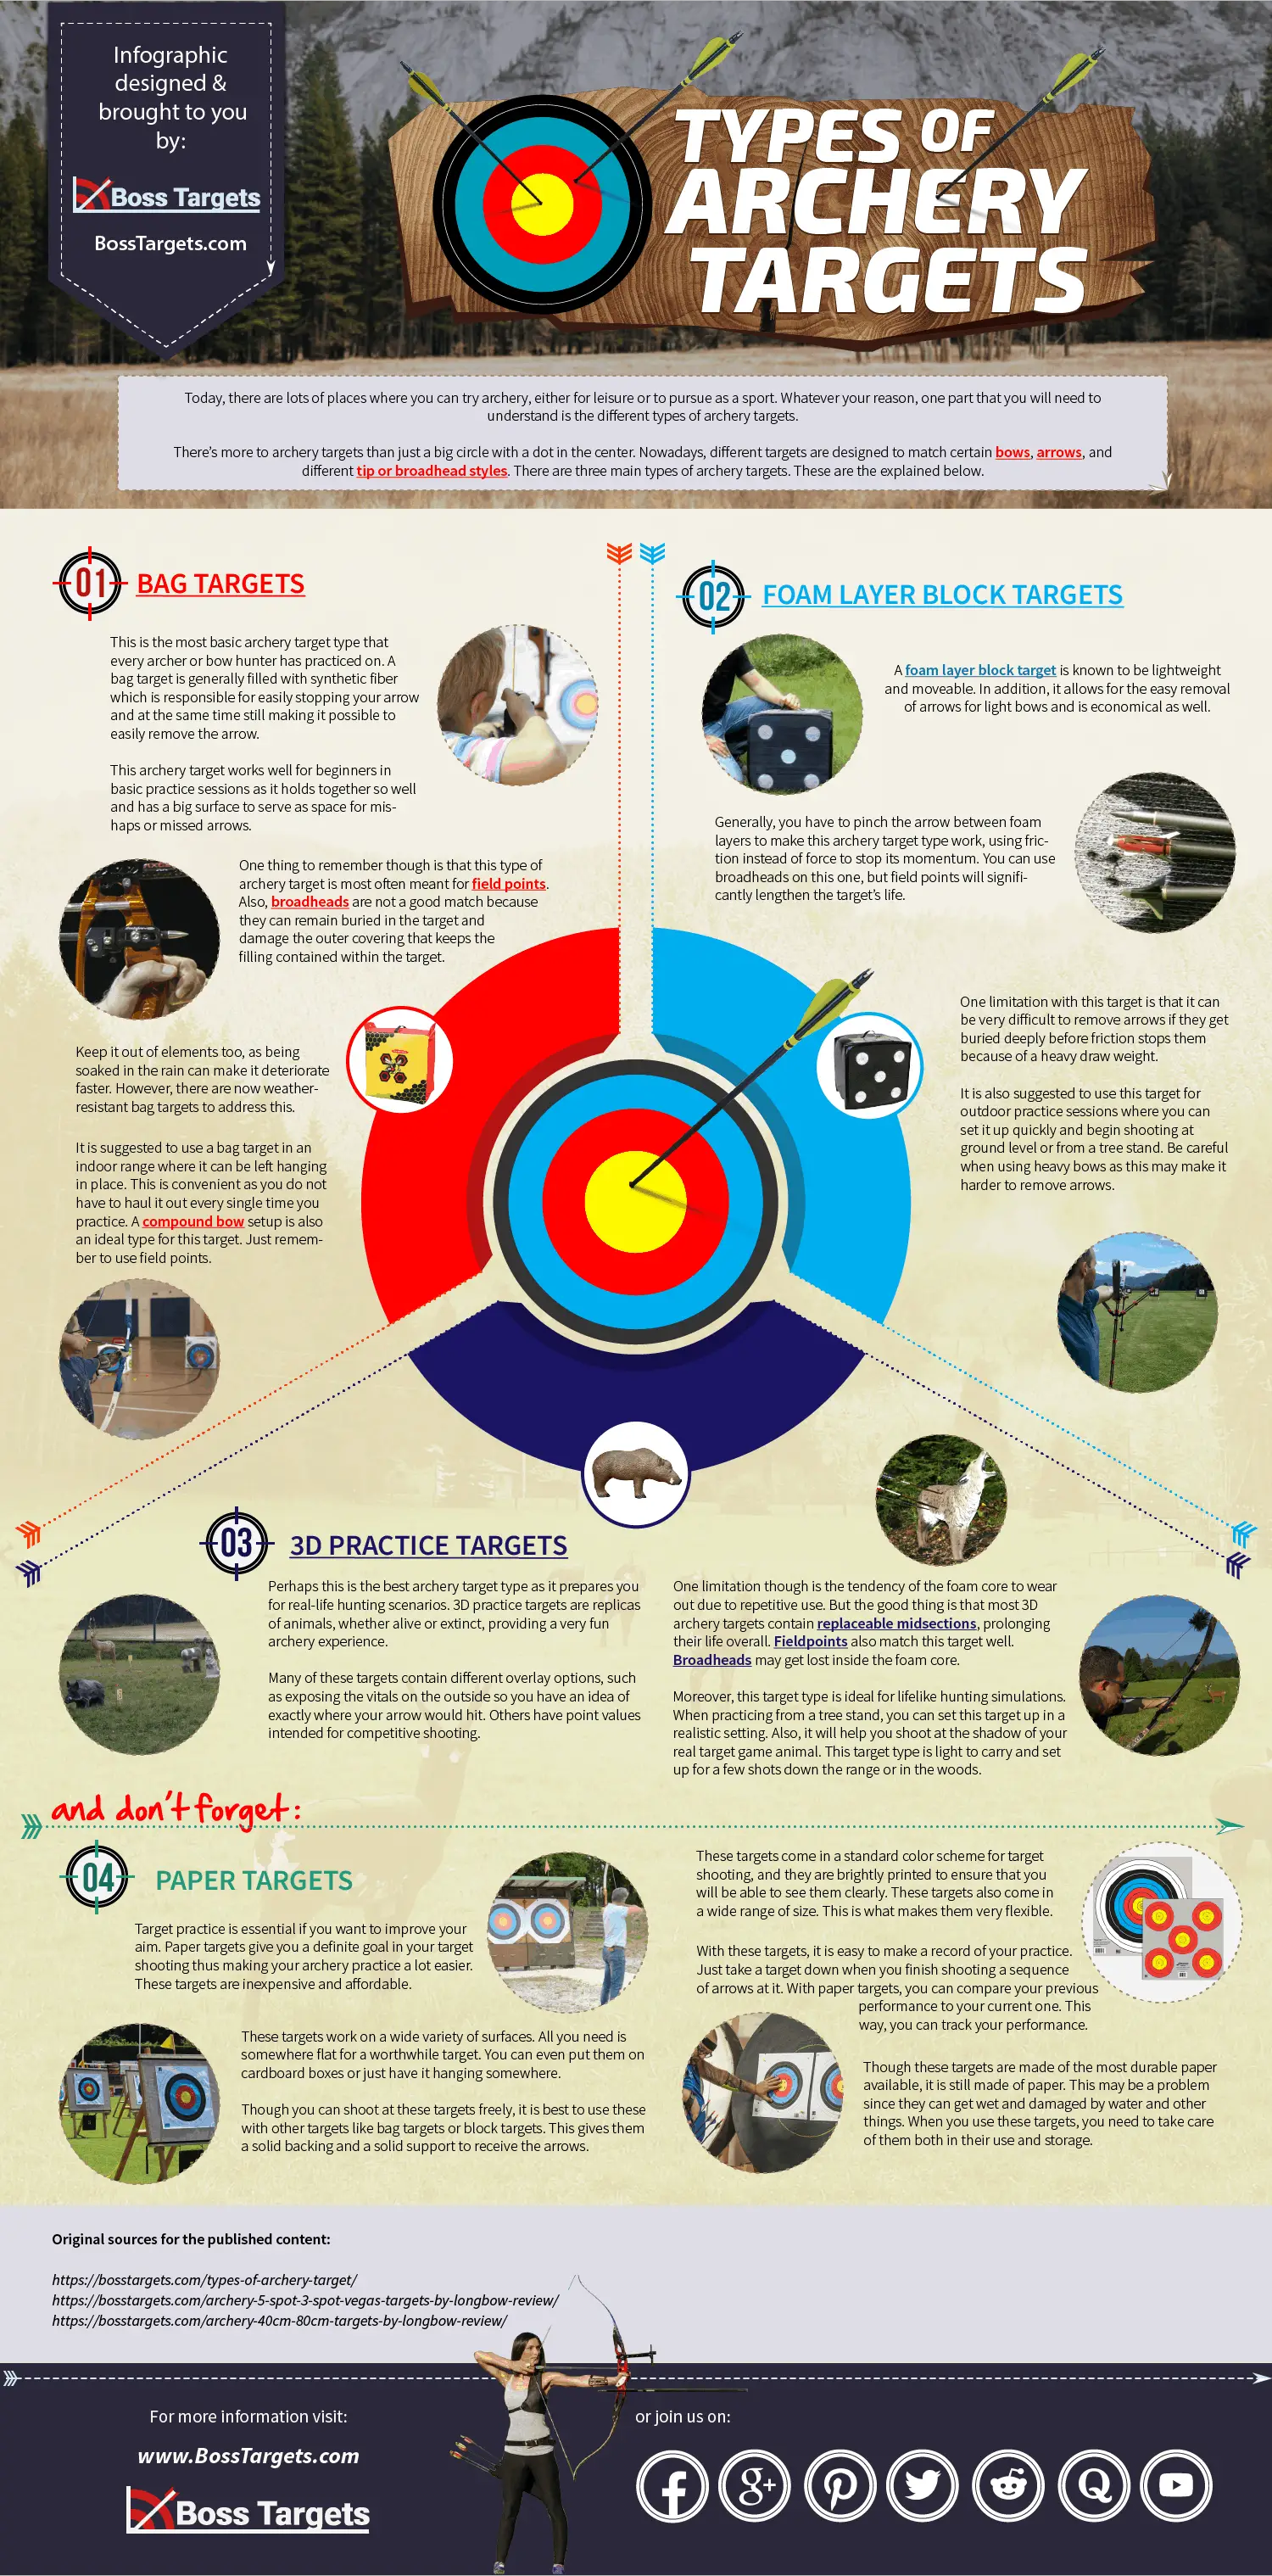 Types of Archery targets